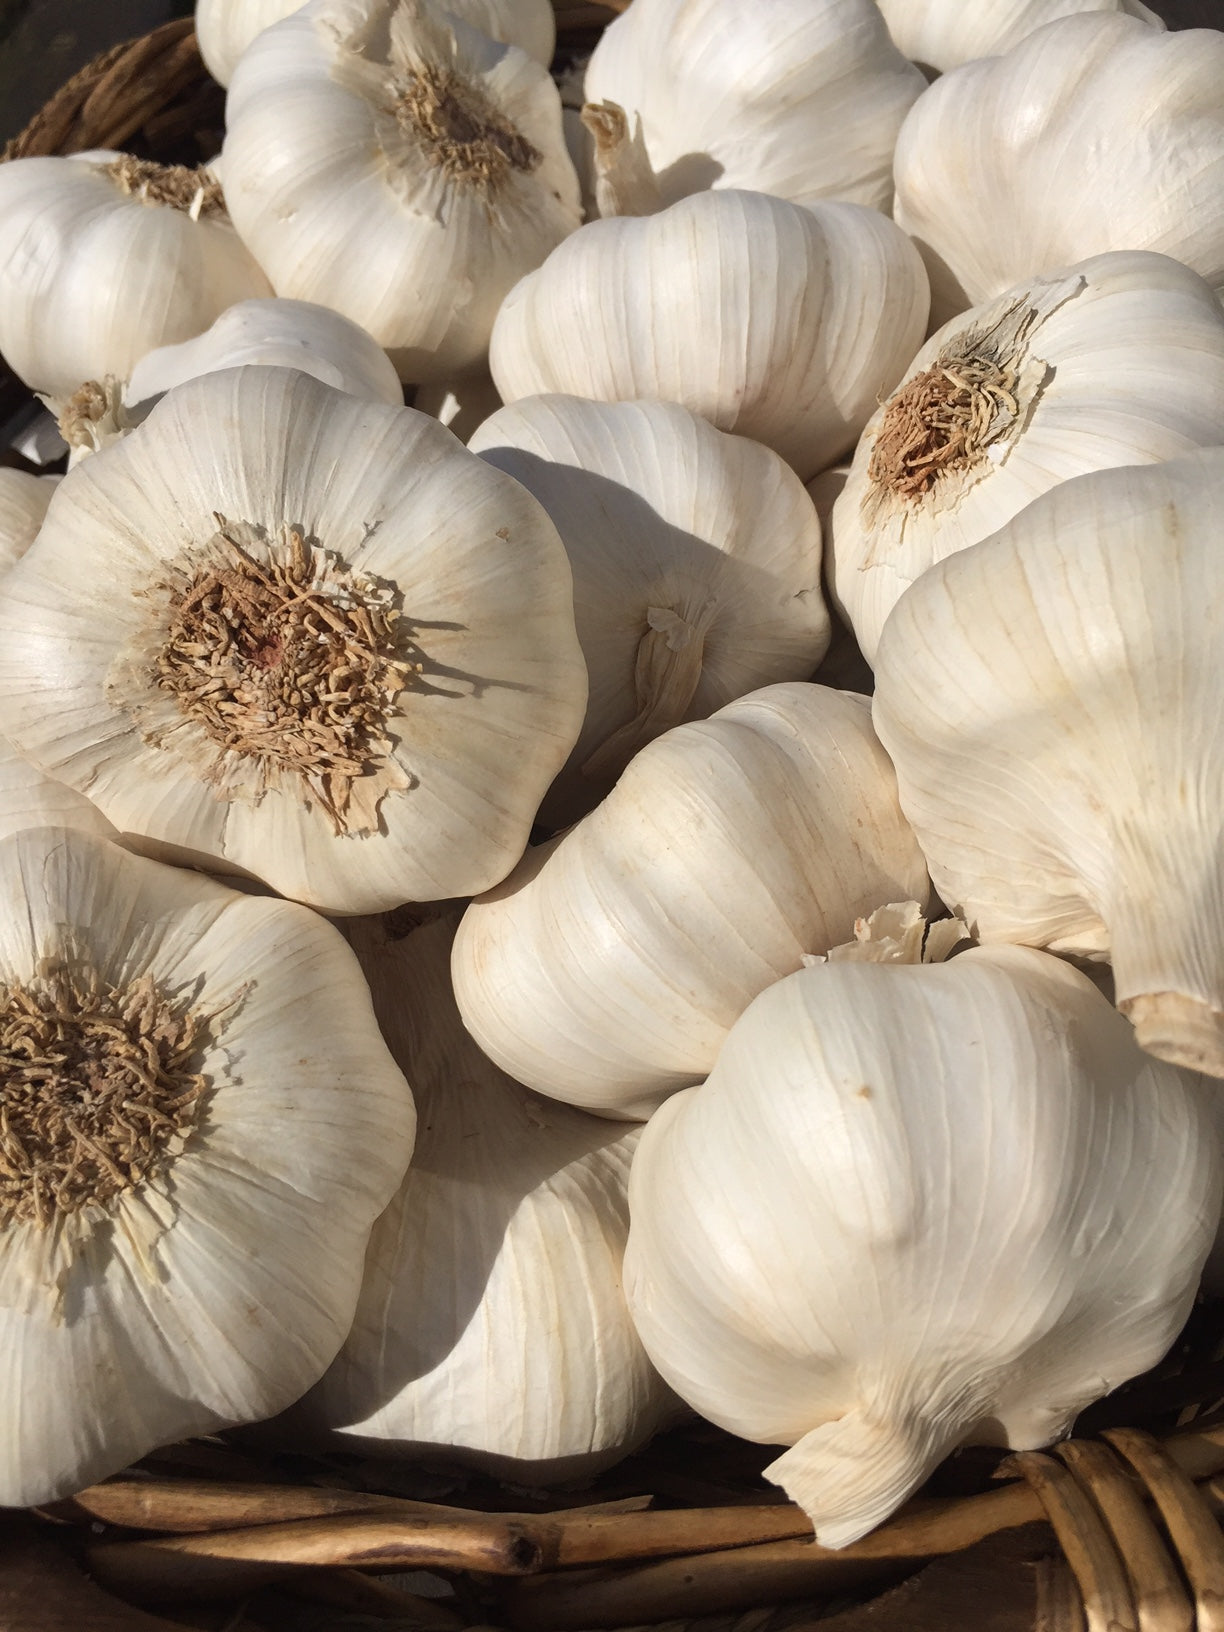 Garlic and the common cold